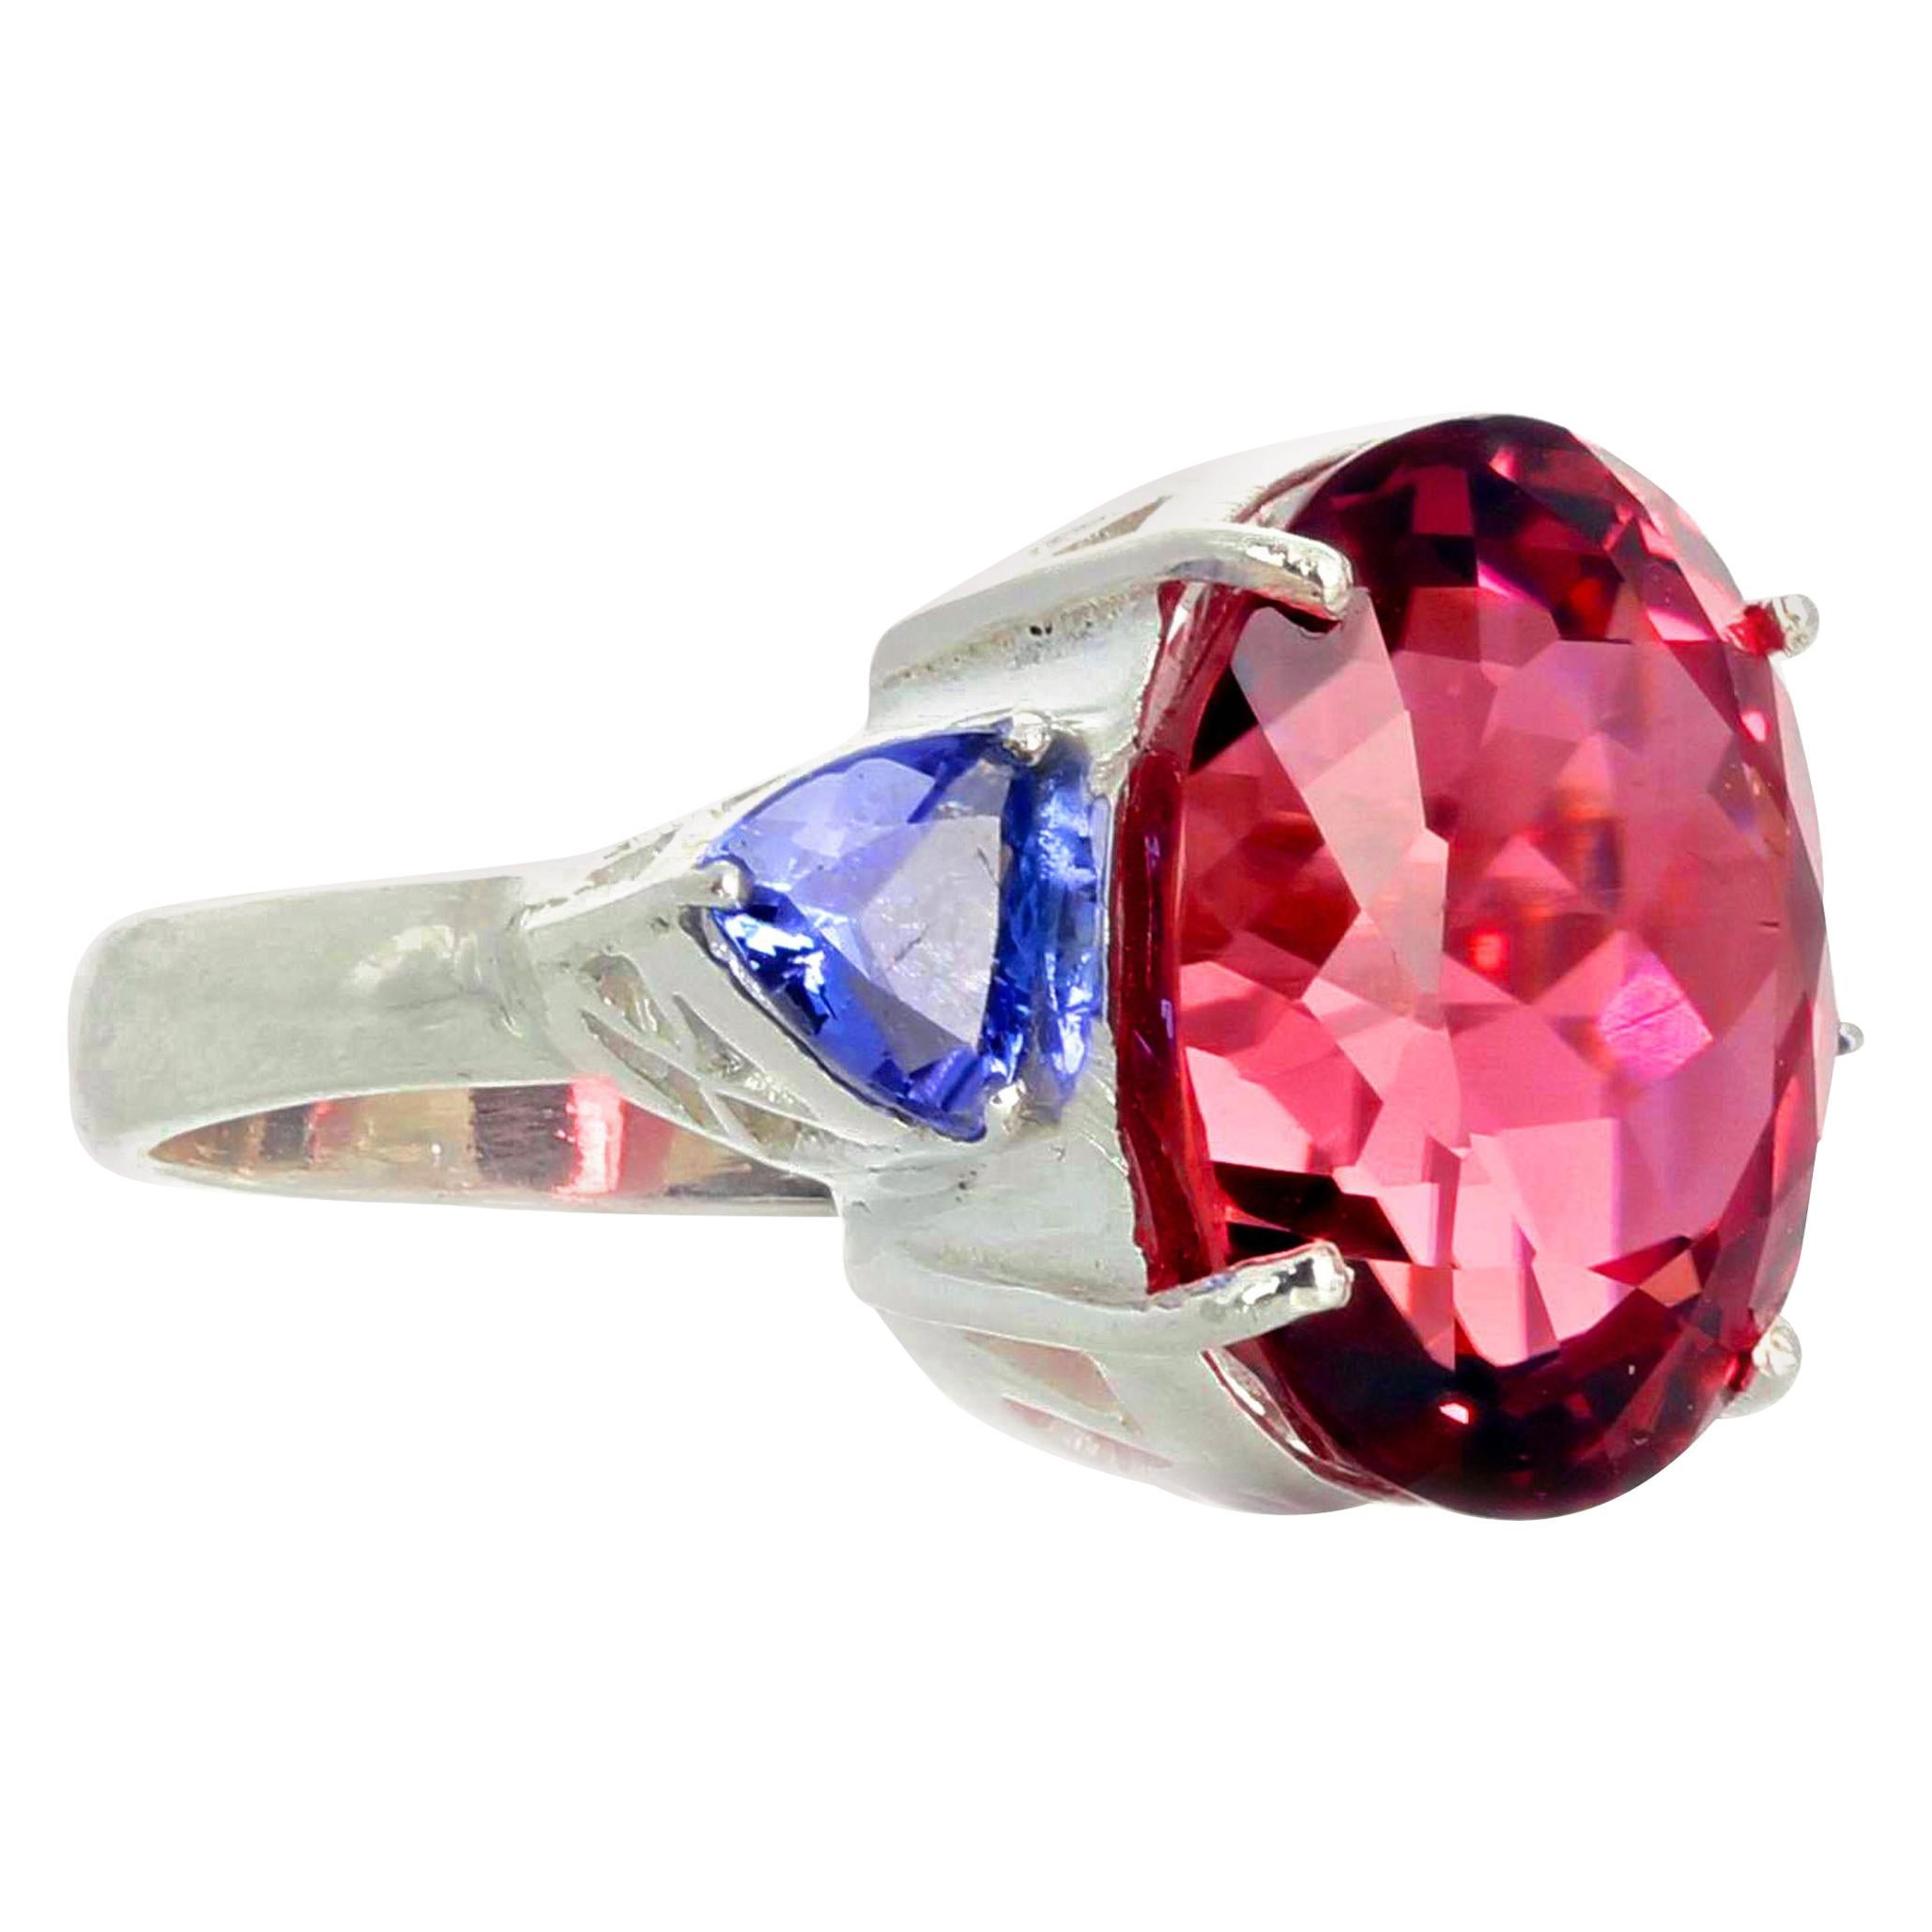 AJD Amazingly Intensely Pink 15.7 Carat "no inclusions"Tourmaline&Tanzanite Ring For Sale